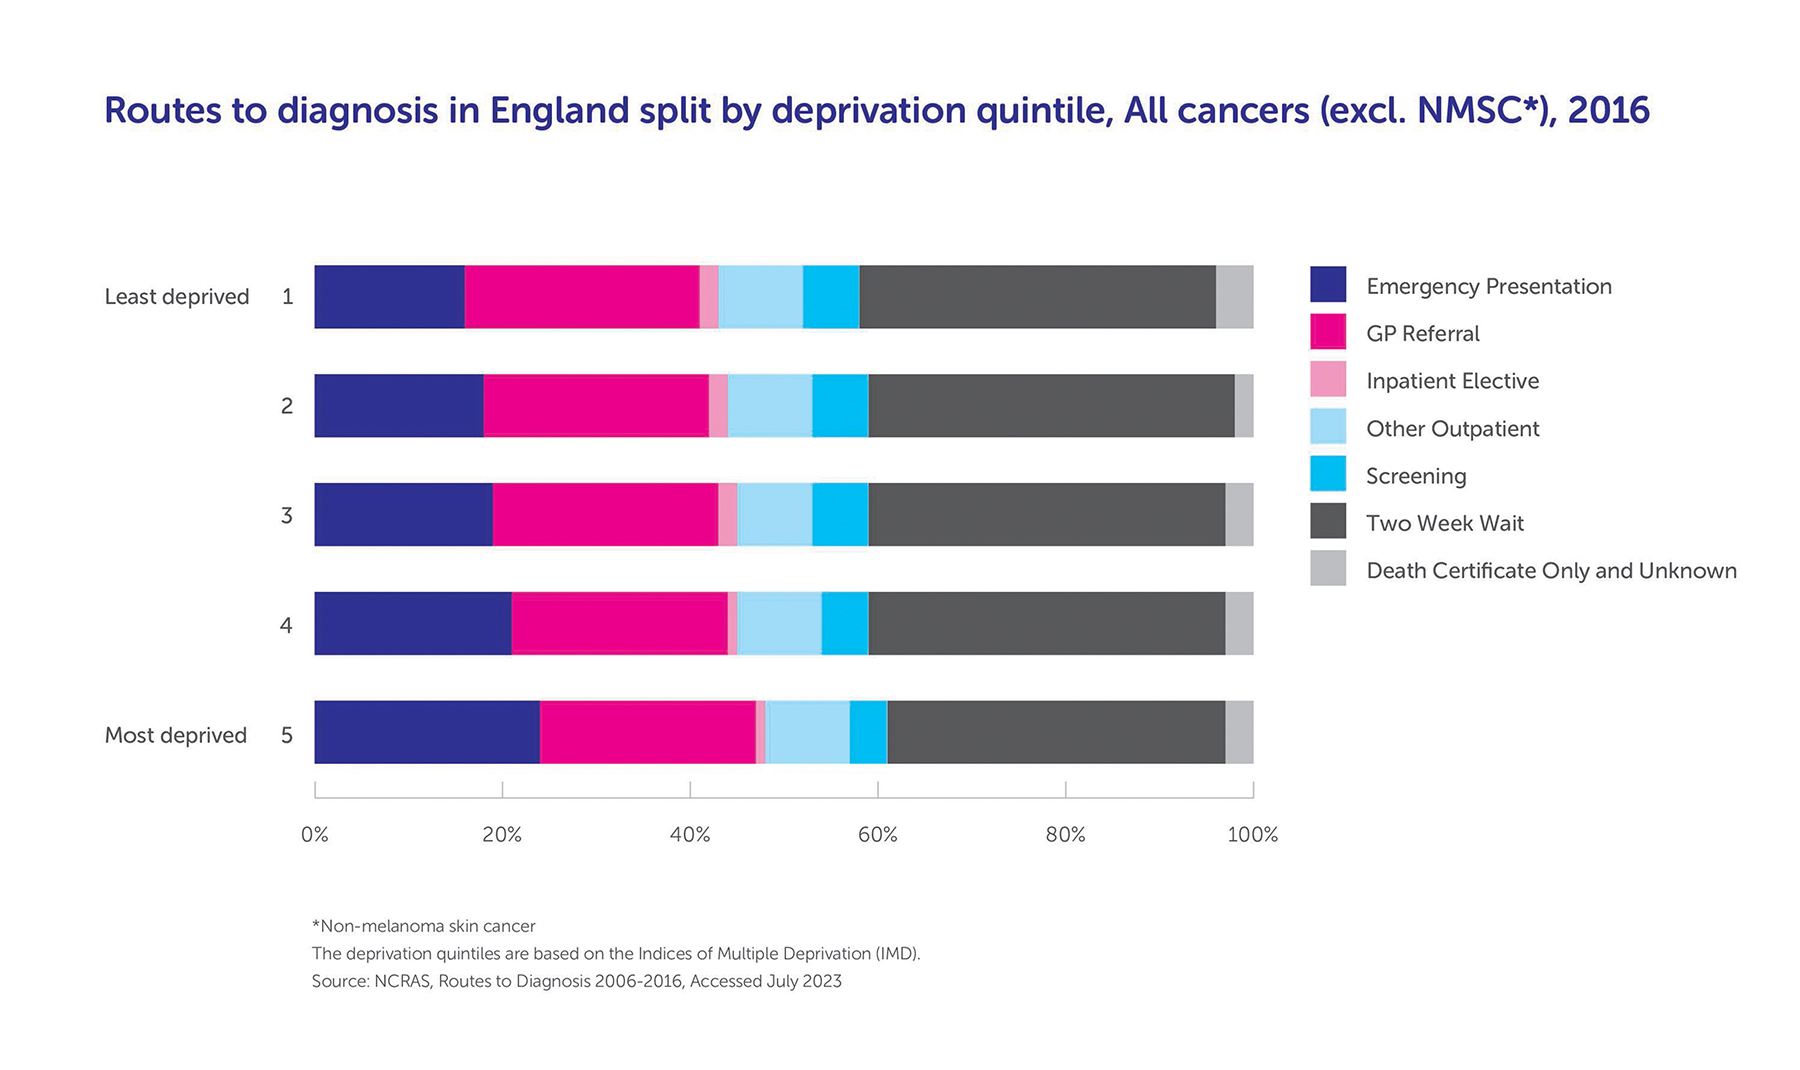 A chart showing how the proportion of cancers diagnosed through different routes changes according to deprivation status